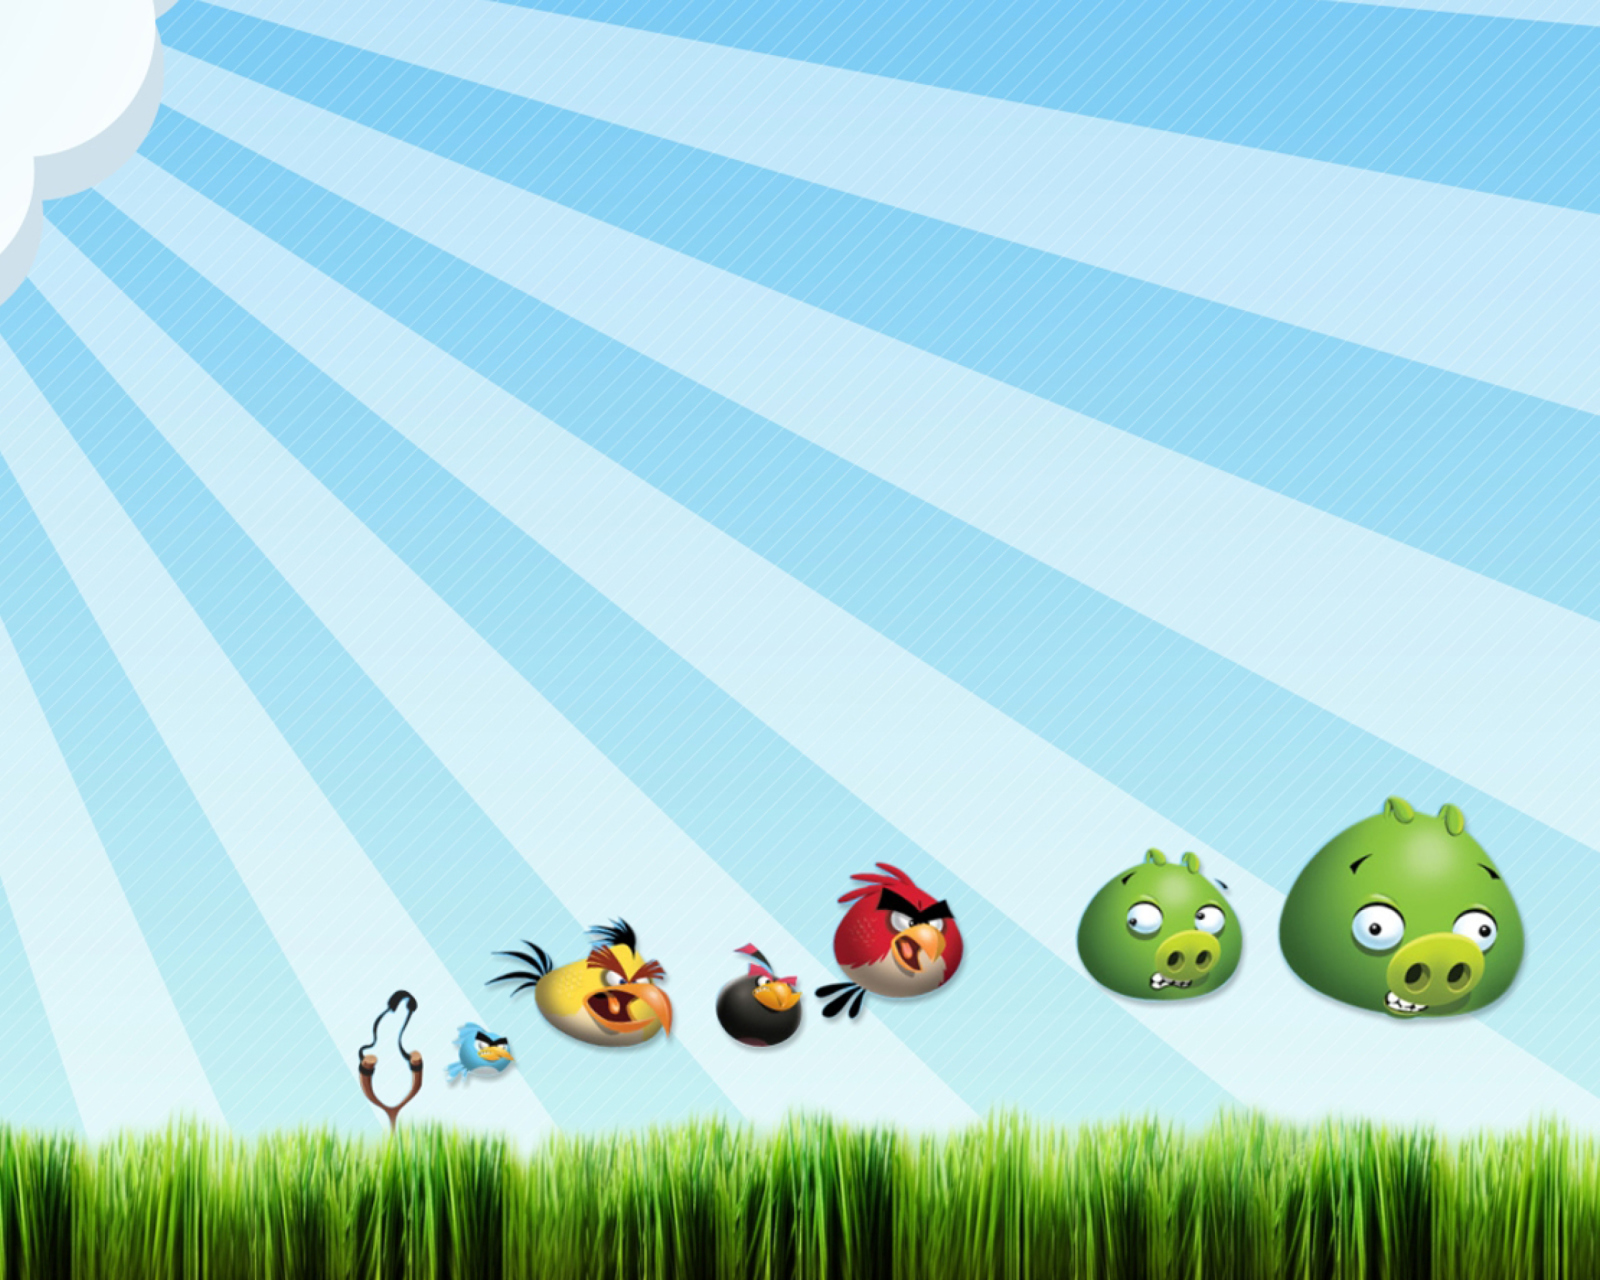 Angry Birds Bad Pigs wallpaper 1600x1280